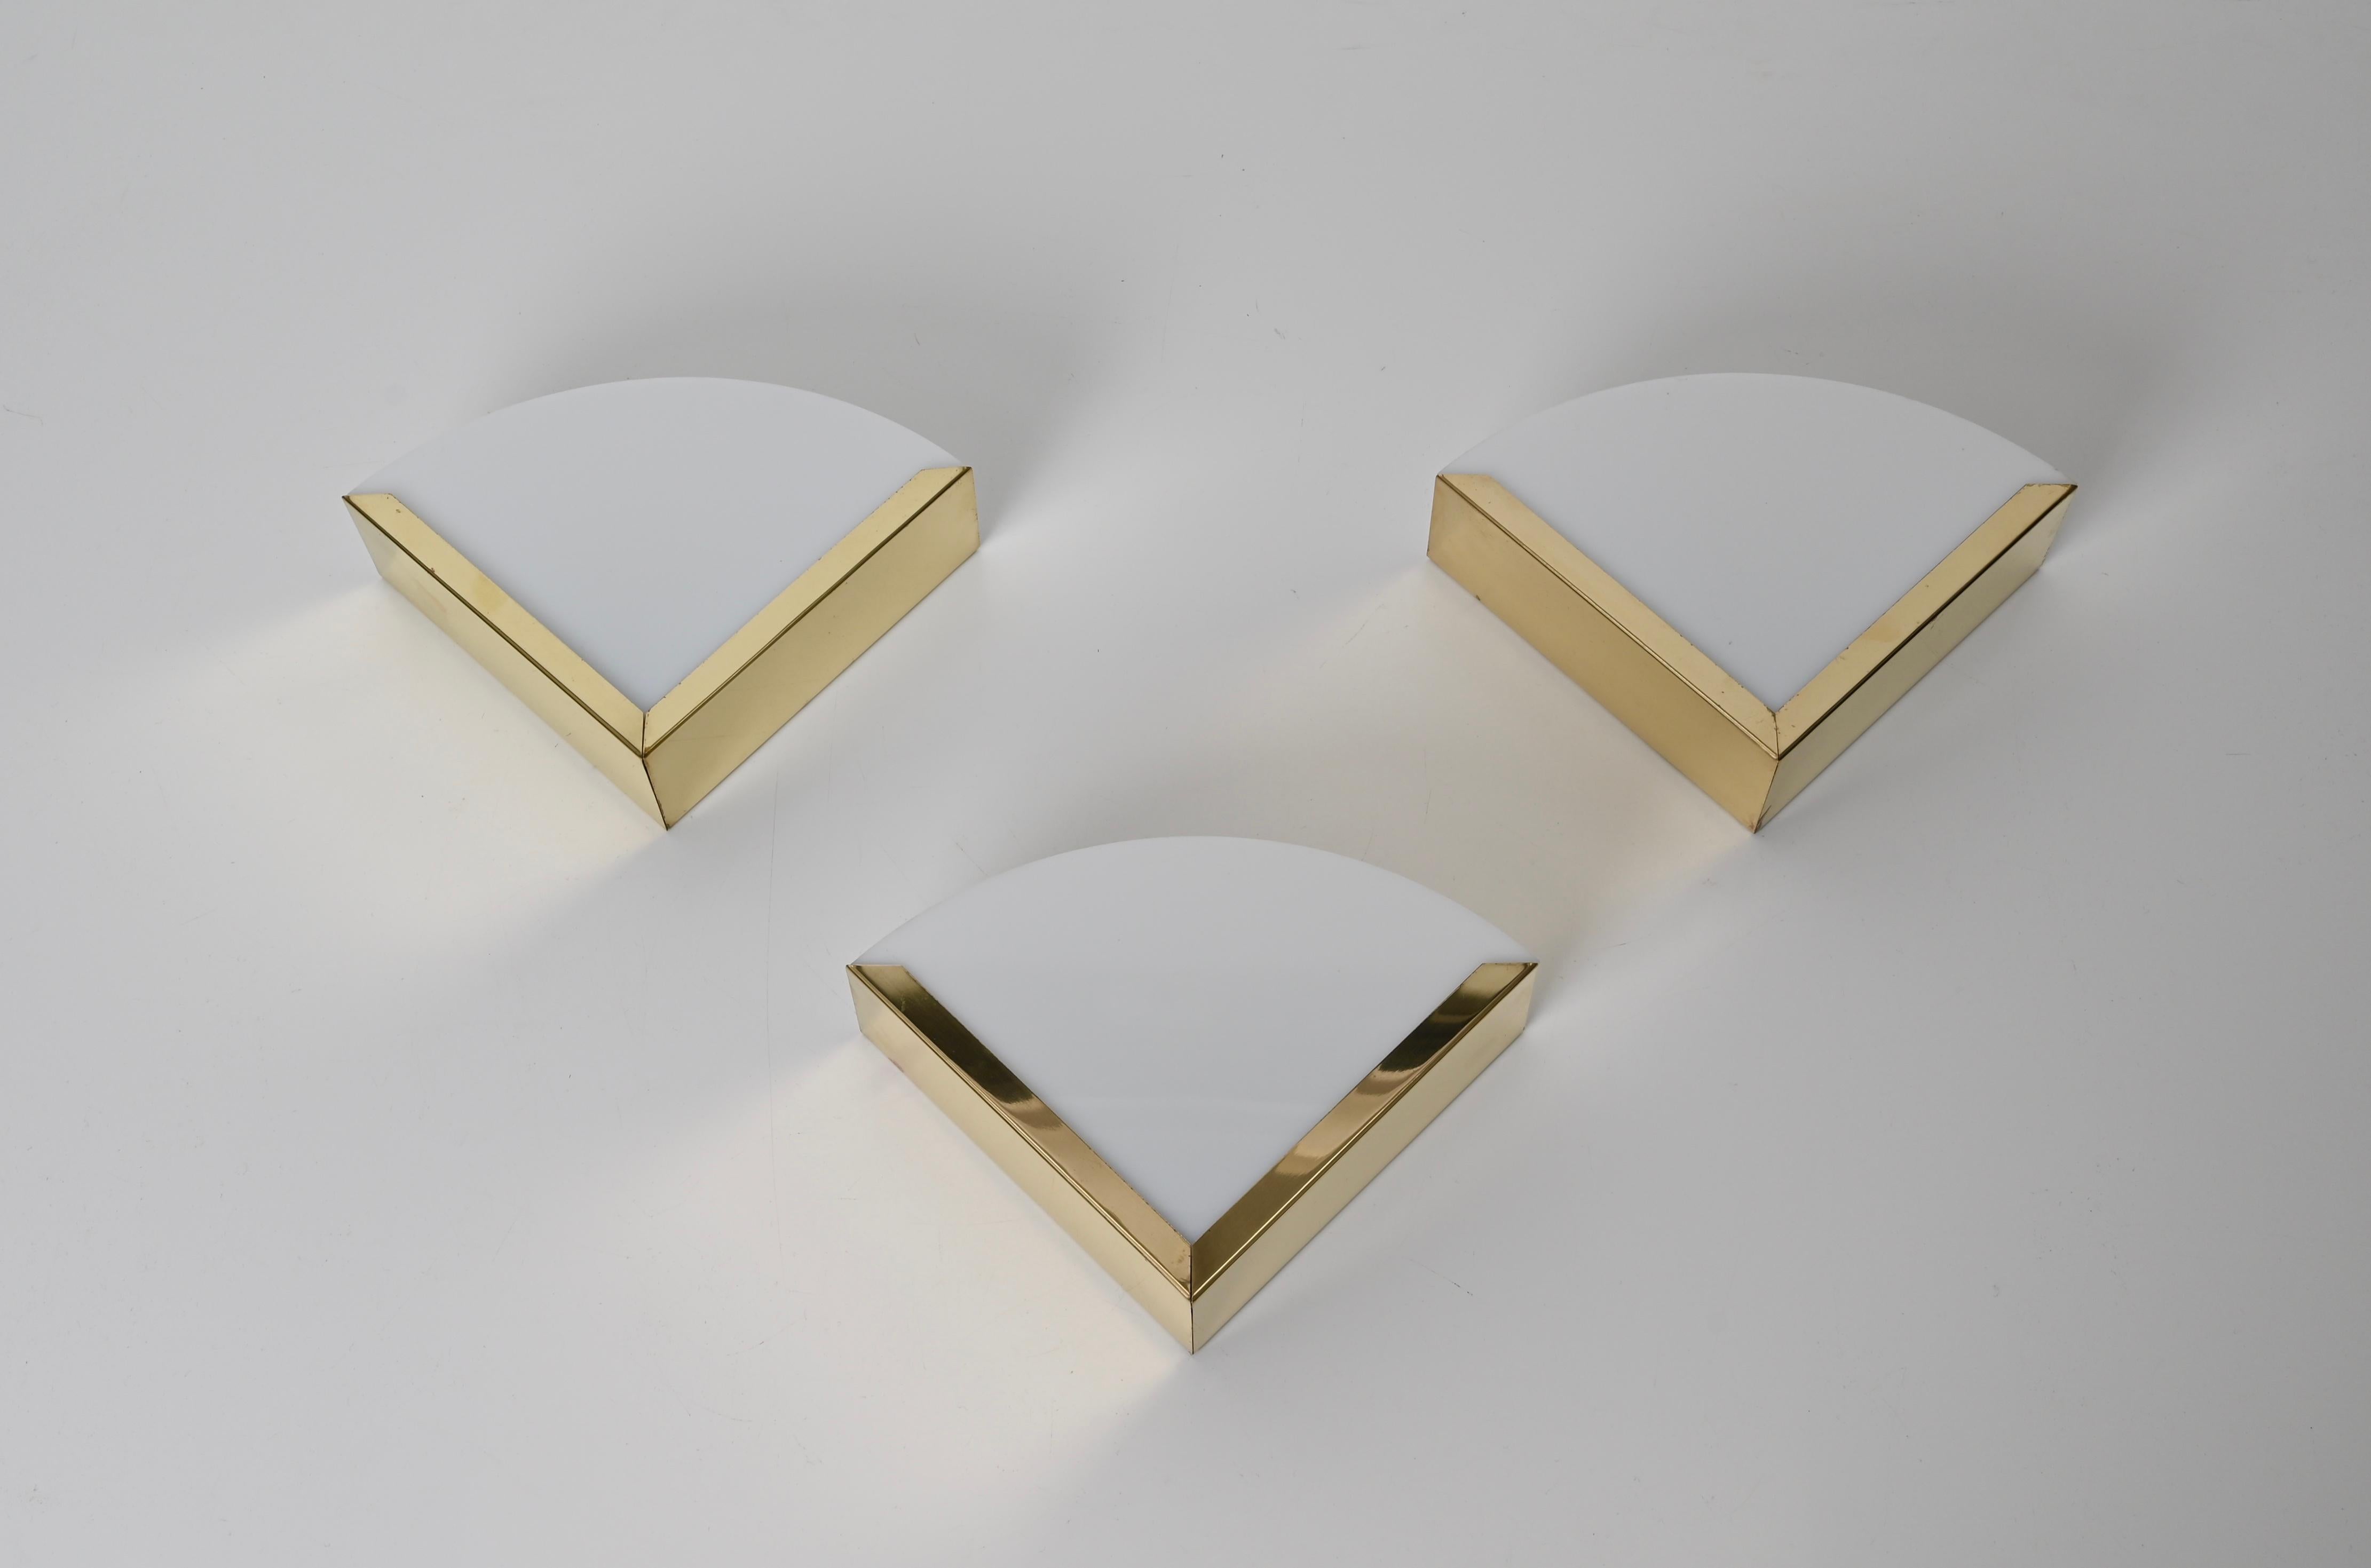 Italian Triangular Sconces in Brass and White Perspex, Italy 1970s For Sale 7